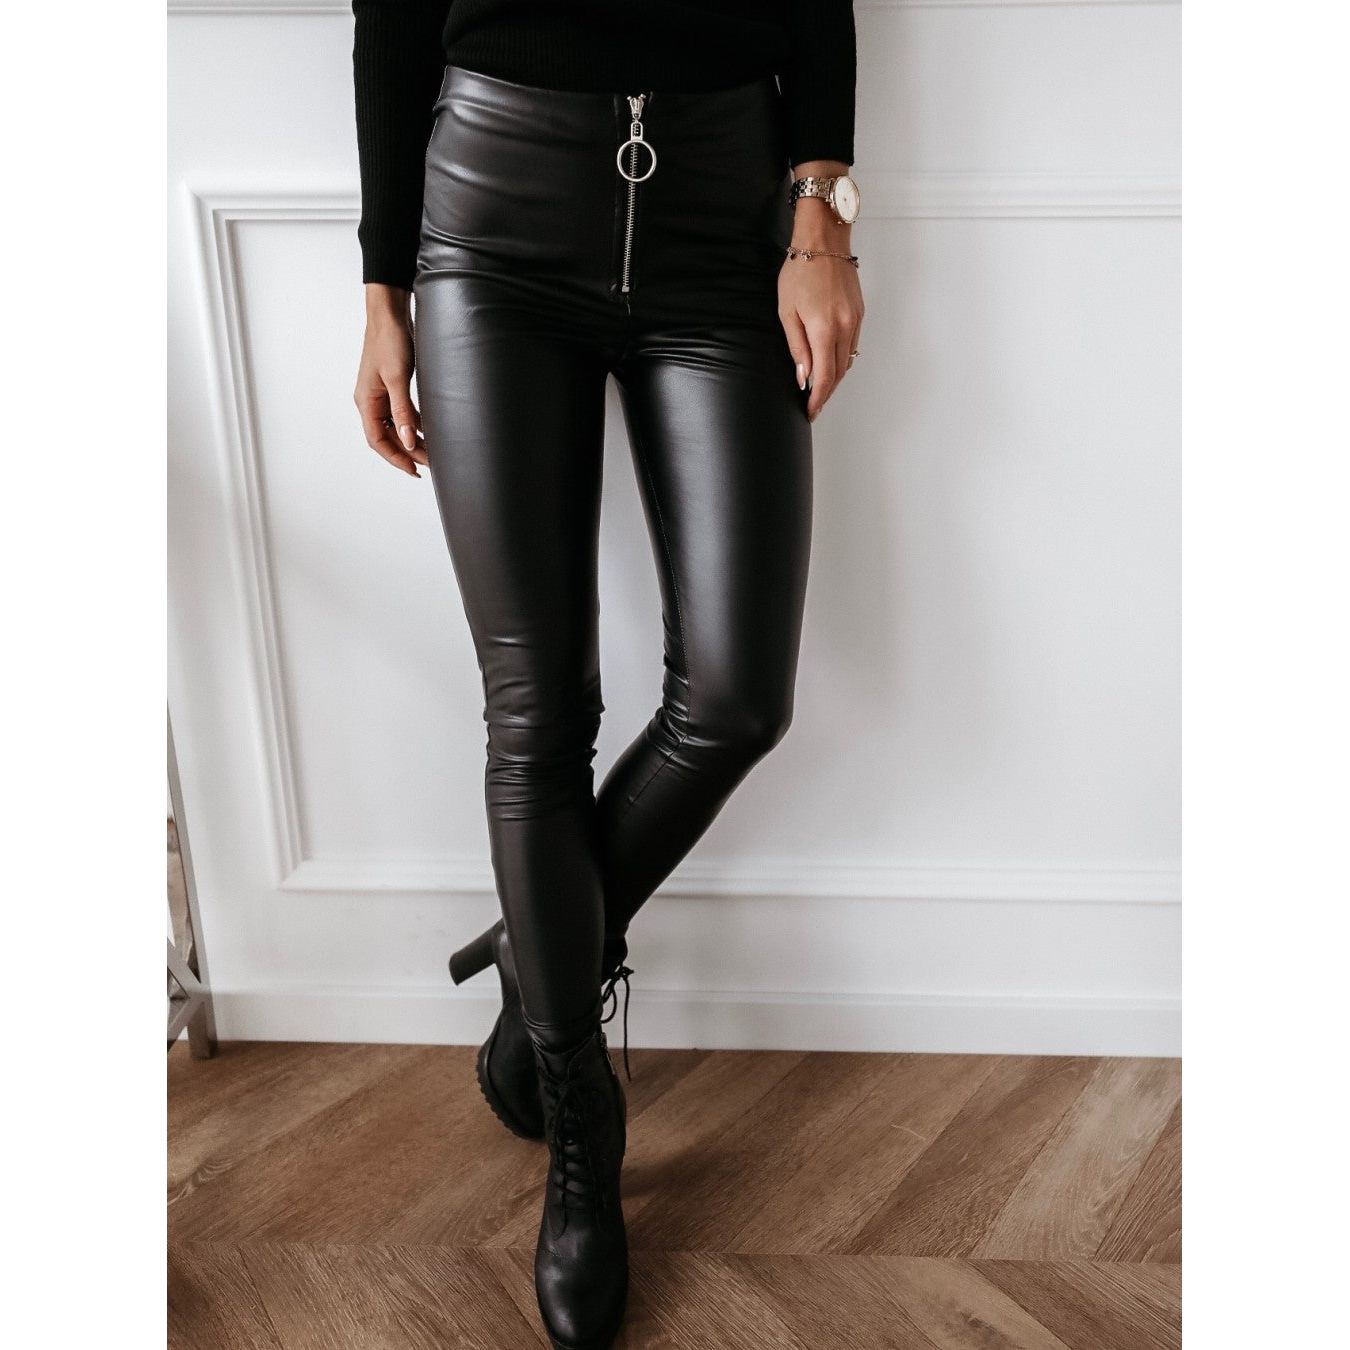 Buy Online Premimum Quality, Trendy and Highly Comfortable Sexy PU Leather Pants Women - FEYONAS